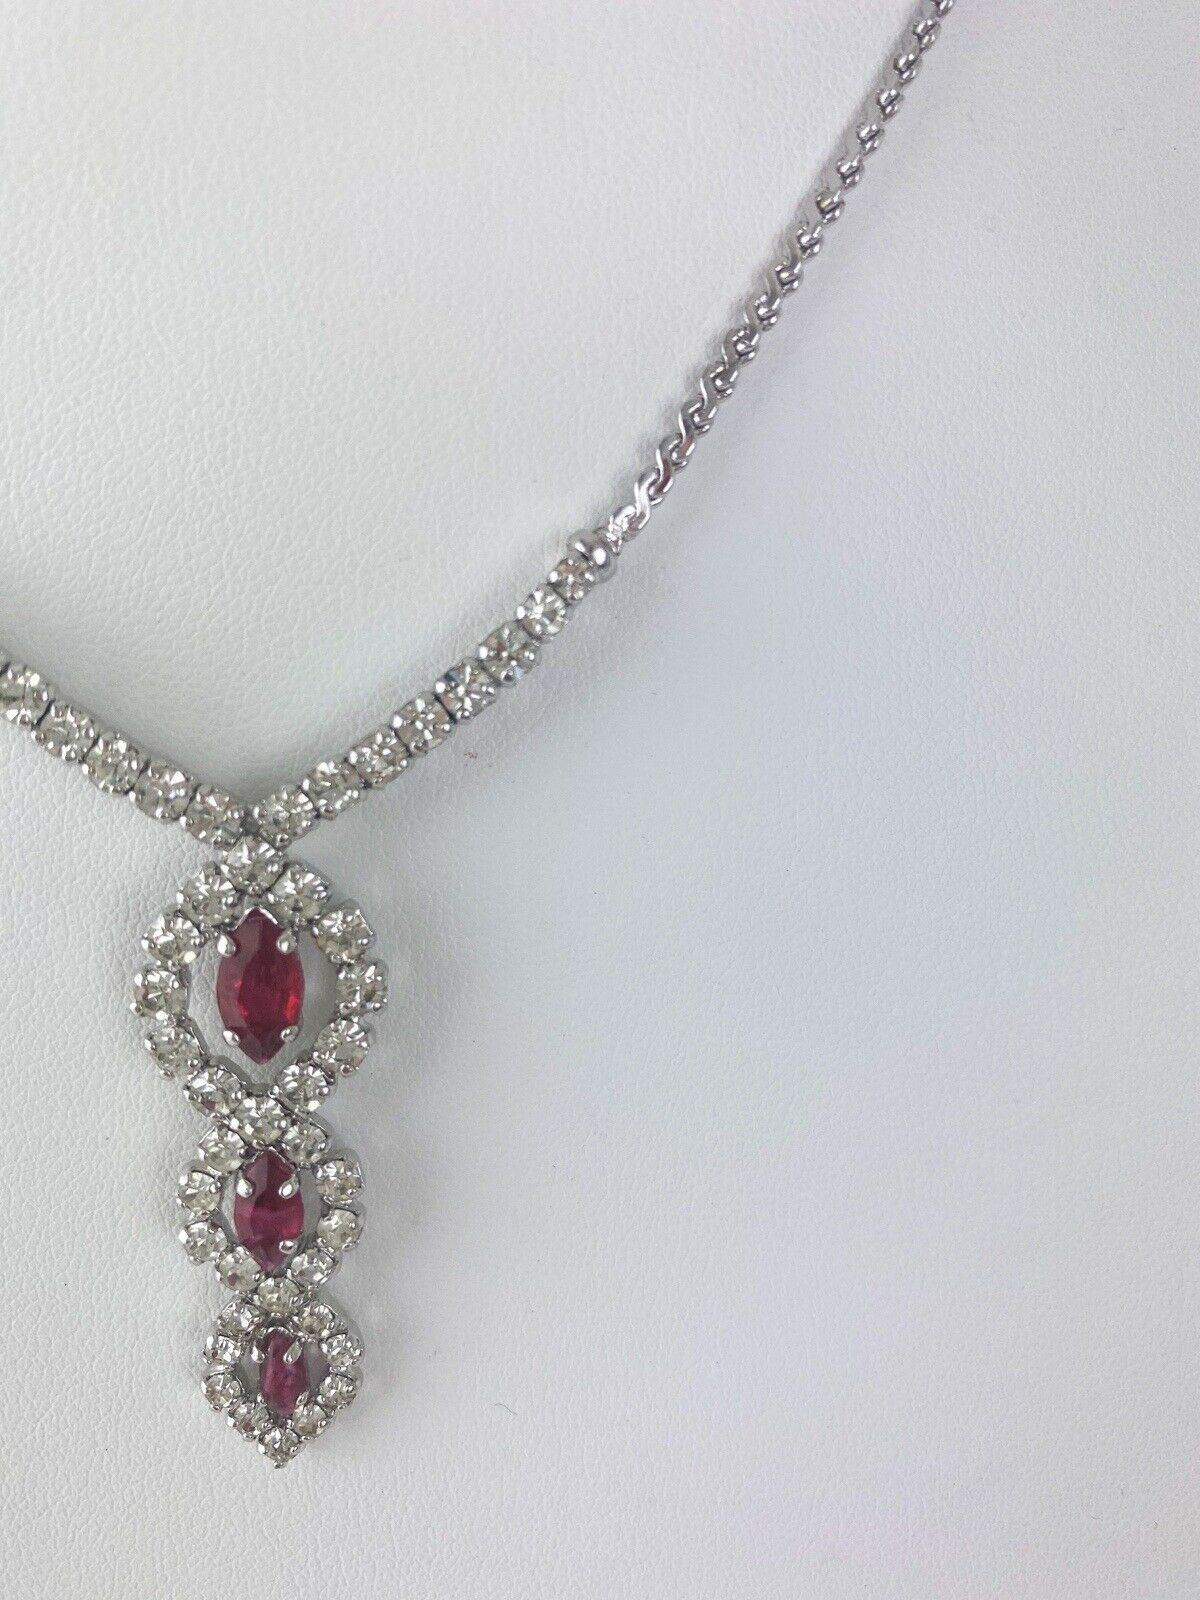 Christian Dior Germany Silver Tone Vintage Choker Necklace Crystal Ruby